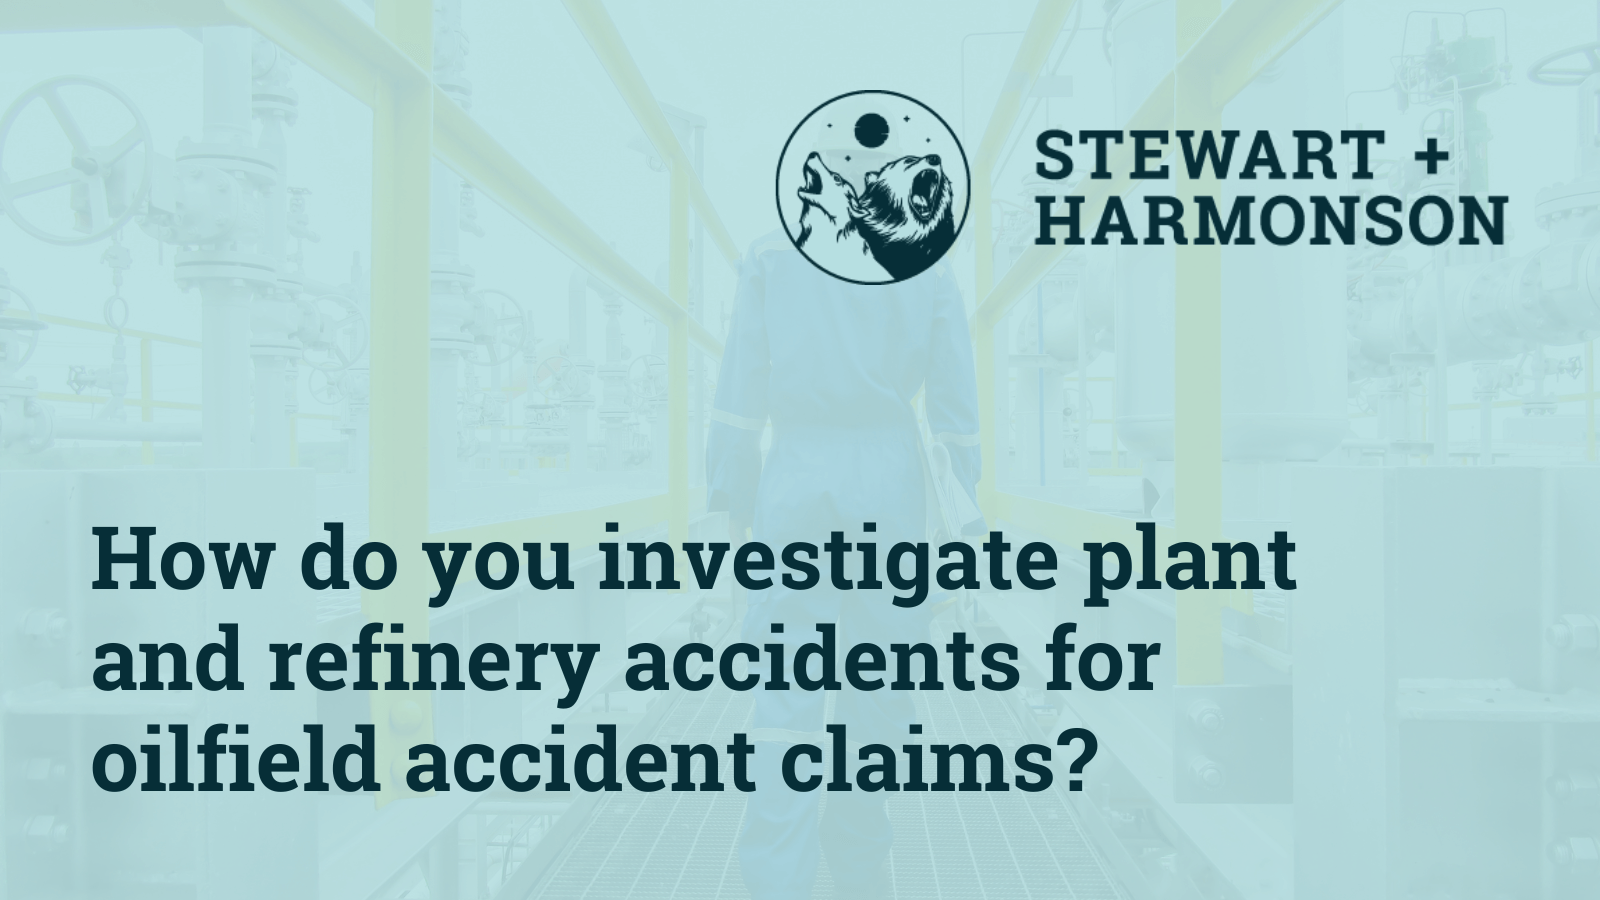 How do you investigate plant and refinery accidents for oilfield accident claims - Stewart Harmonson Law Firm - New Mexico